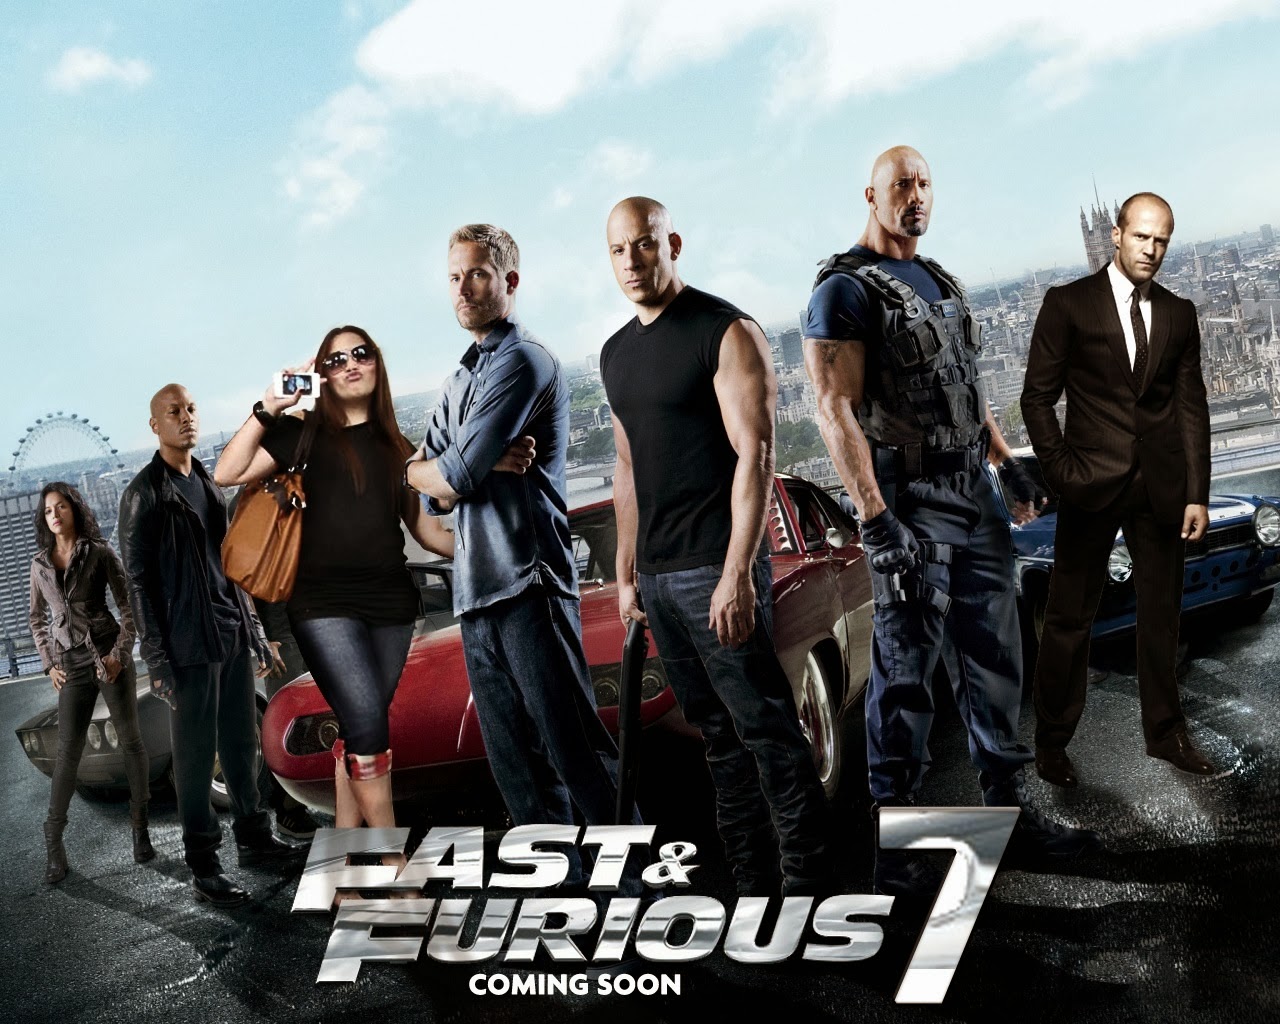 download fast and furious 7 full movie free in english